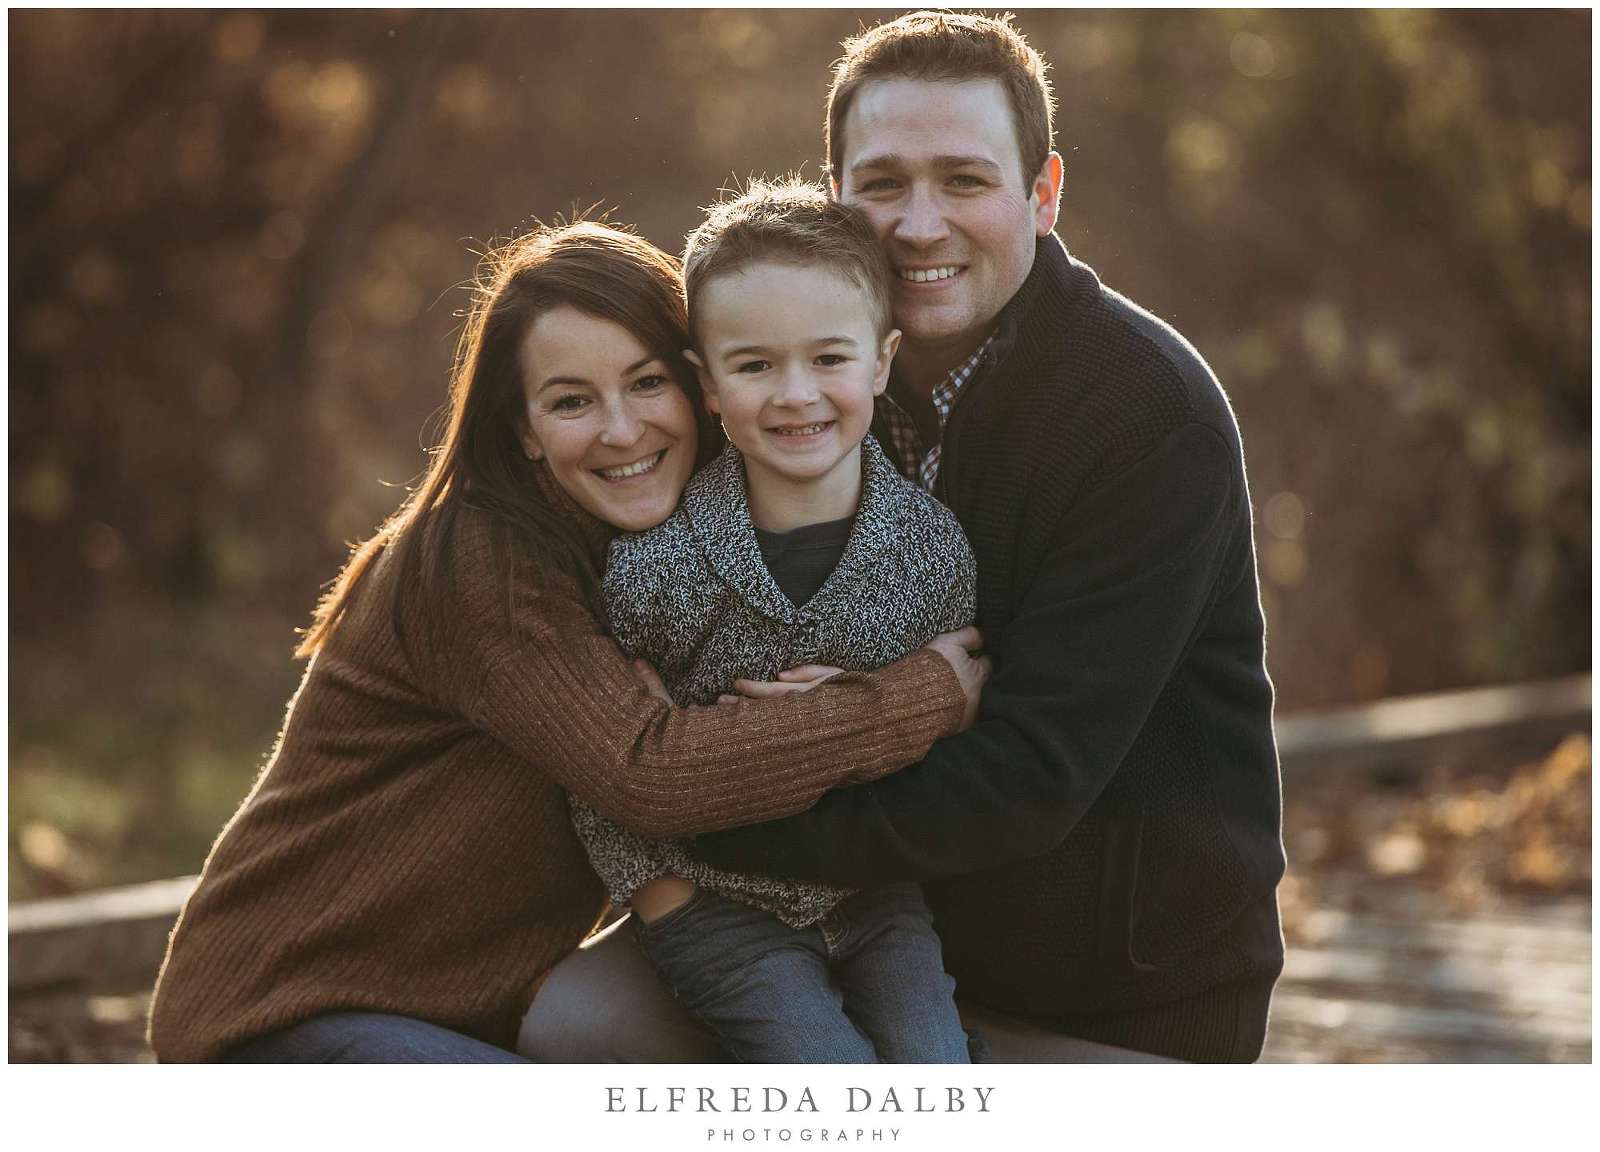 17 Best Family Photo Poses for Your Next Session